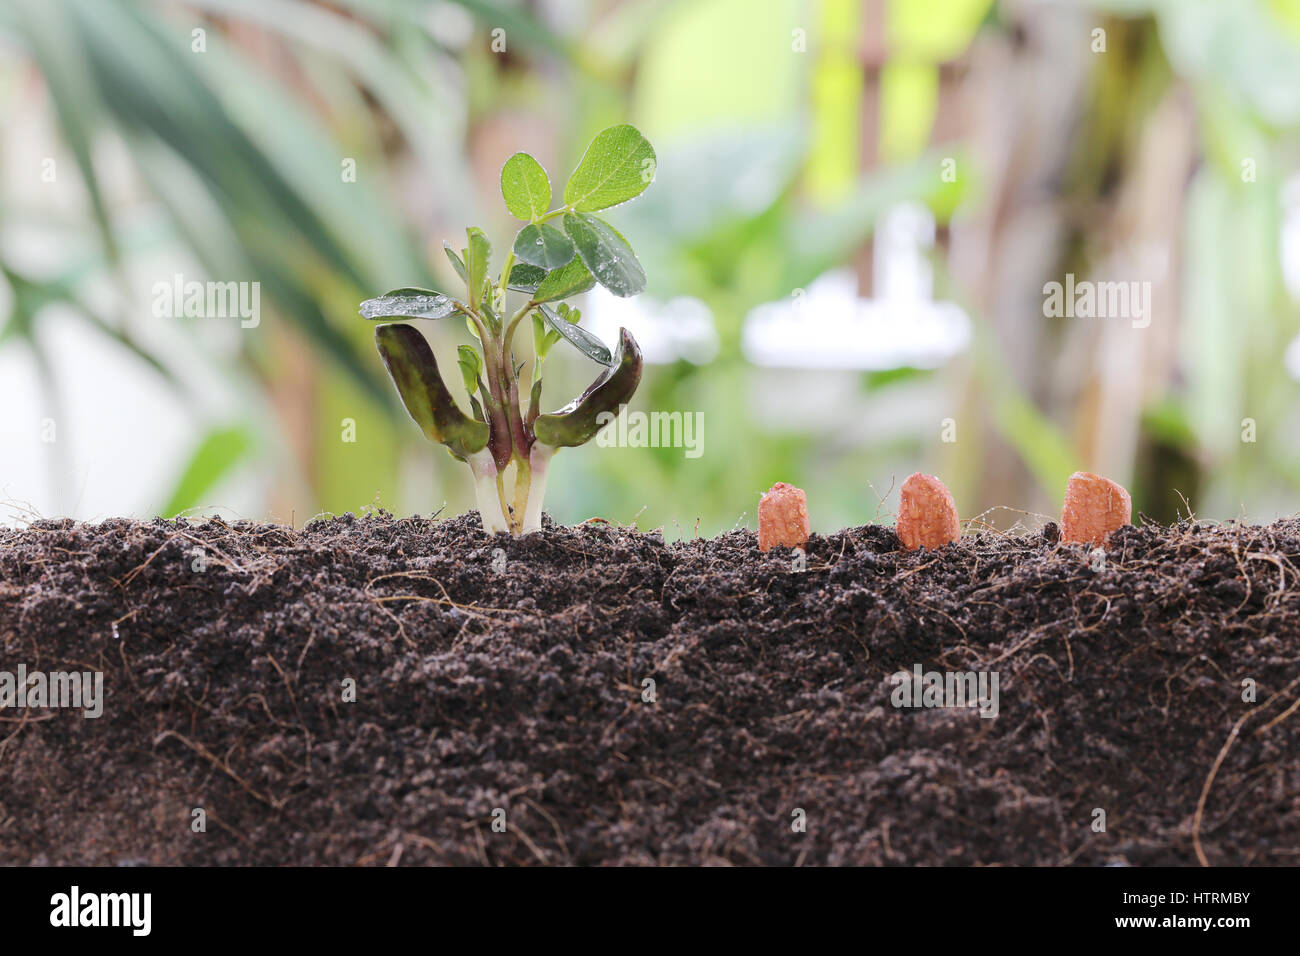 Seedlings of peanut on soil in the Vegetable garden concept of agriculture and growing design. Stock Photo